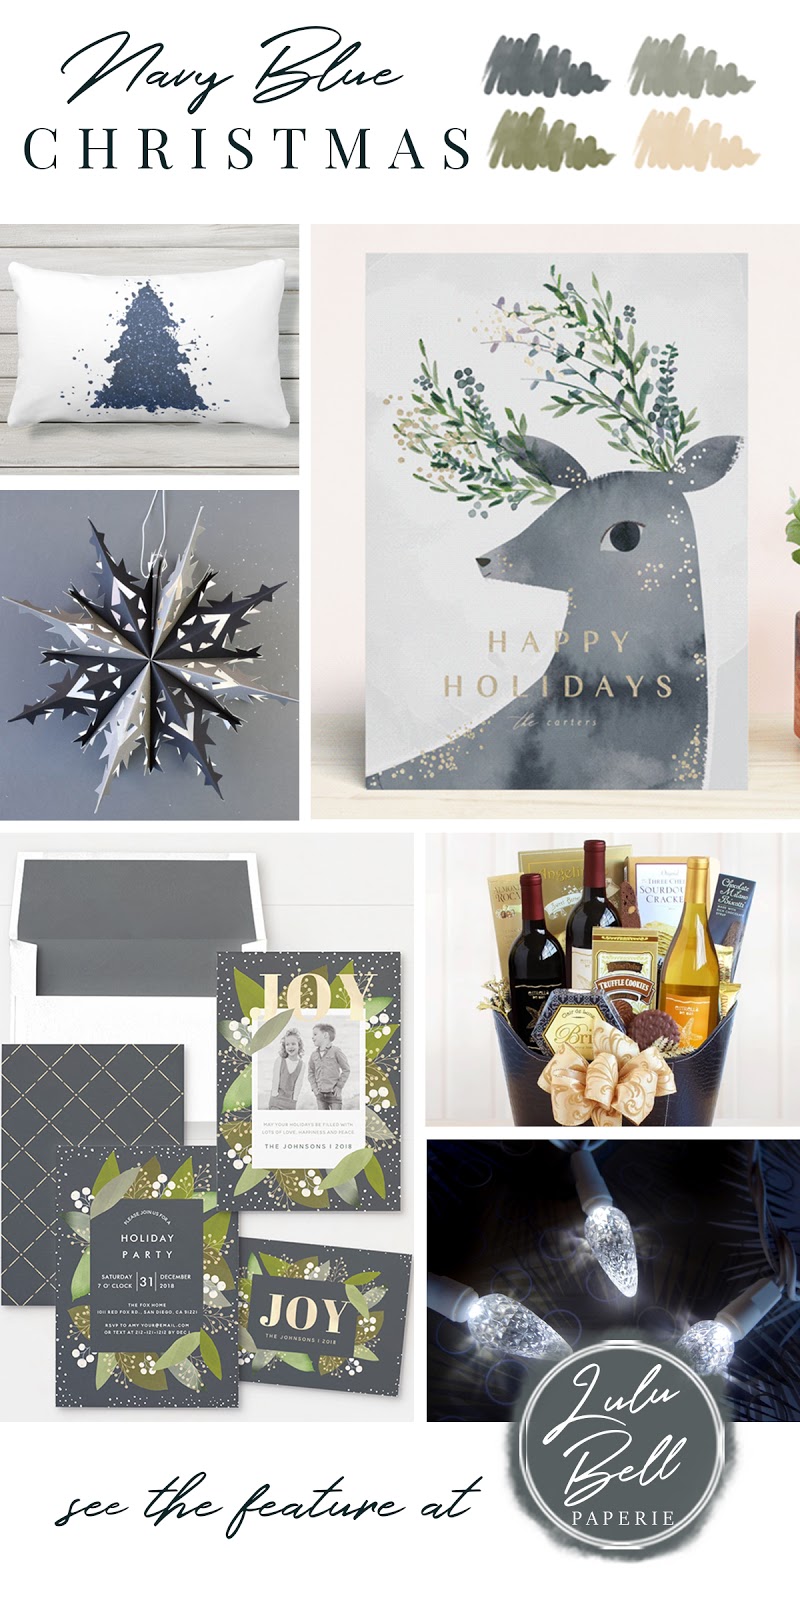 Olive Green, Gold, and Navy Blue Christmas Color Palette Inspiration - Throw Pillow, Deer Christmas Card, Paper Snowflake, Joy Stationery Set, Wine Gift Basket, and Holiday Lights